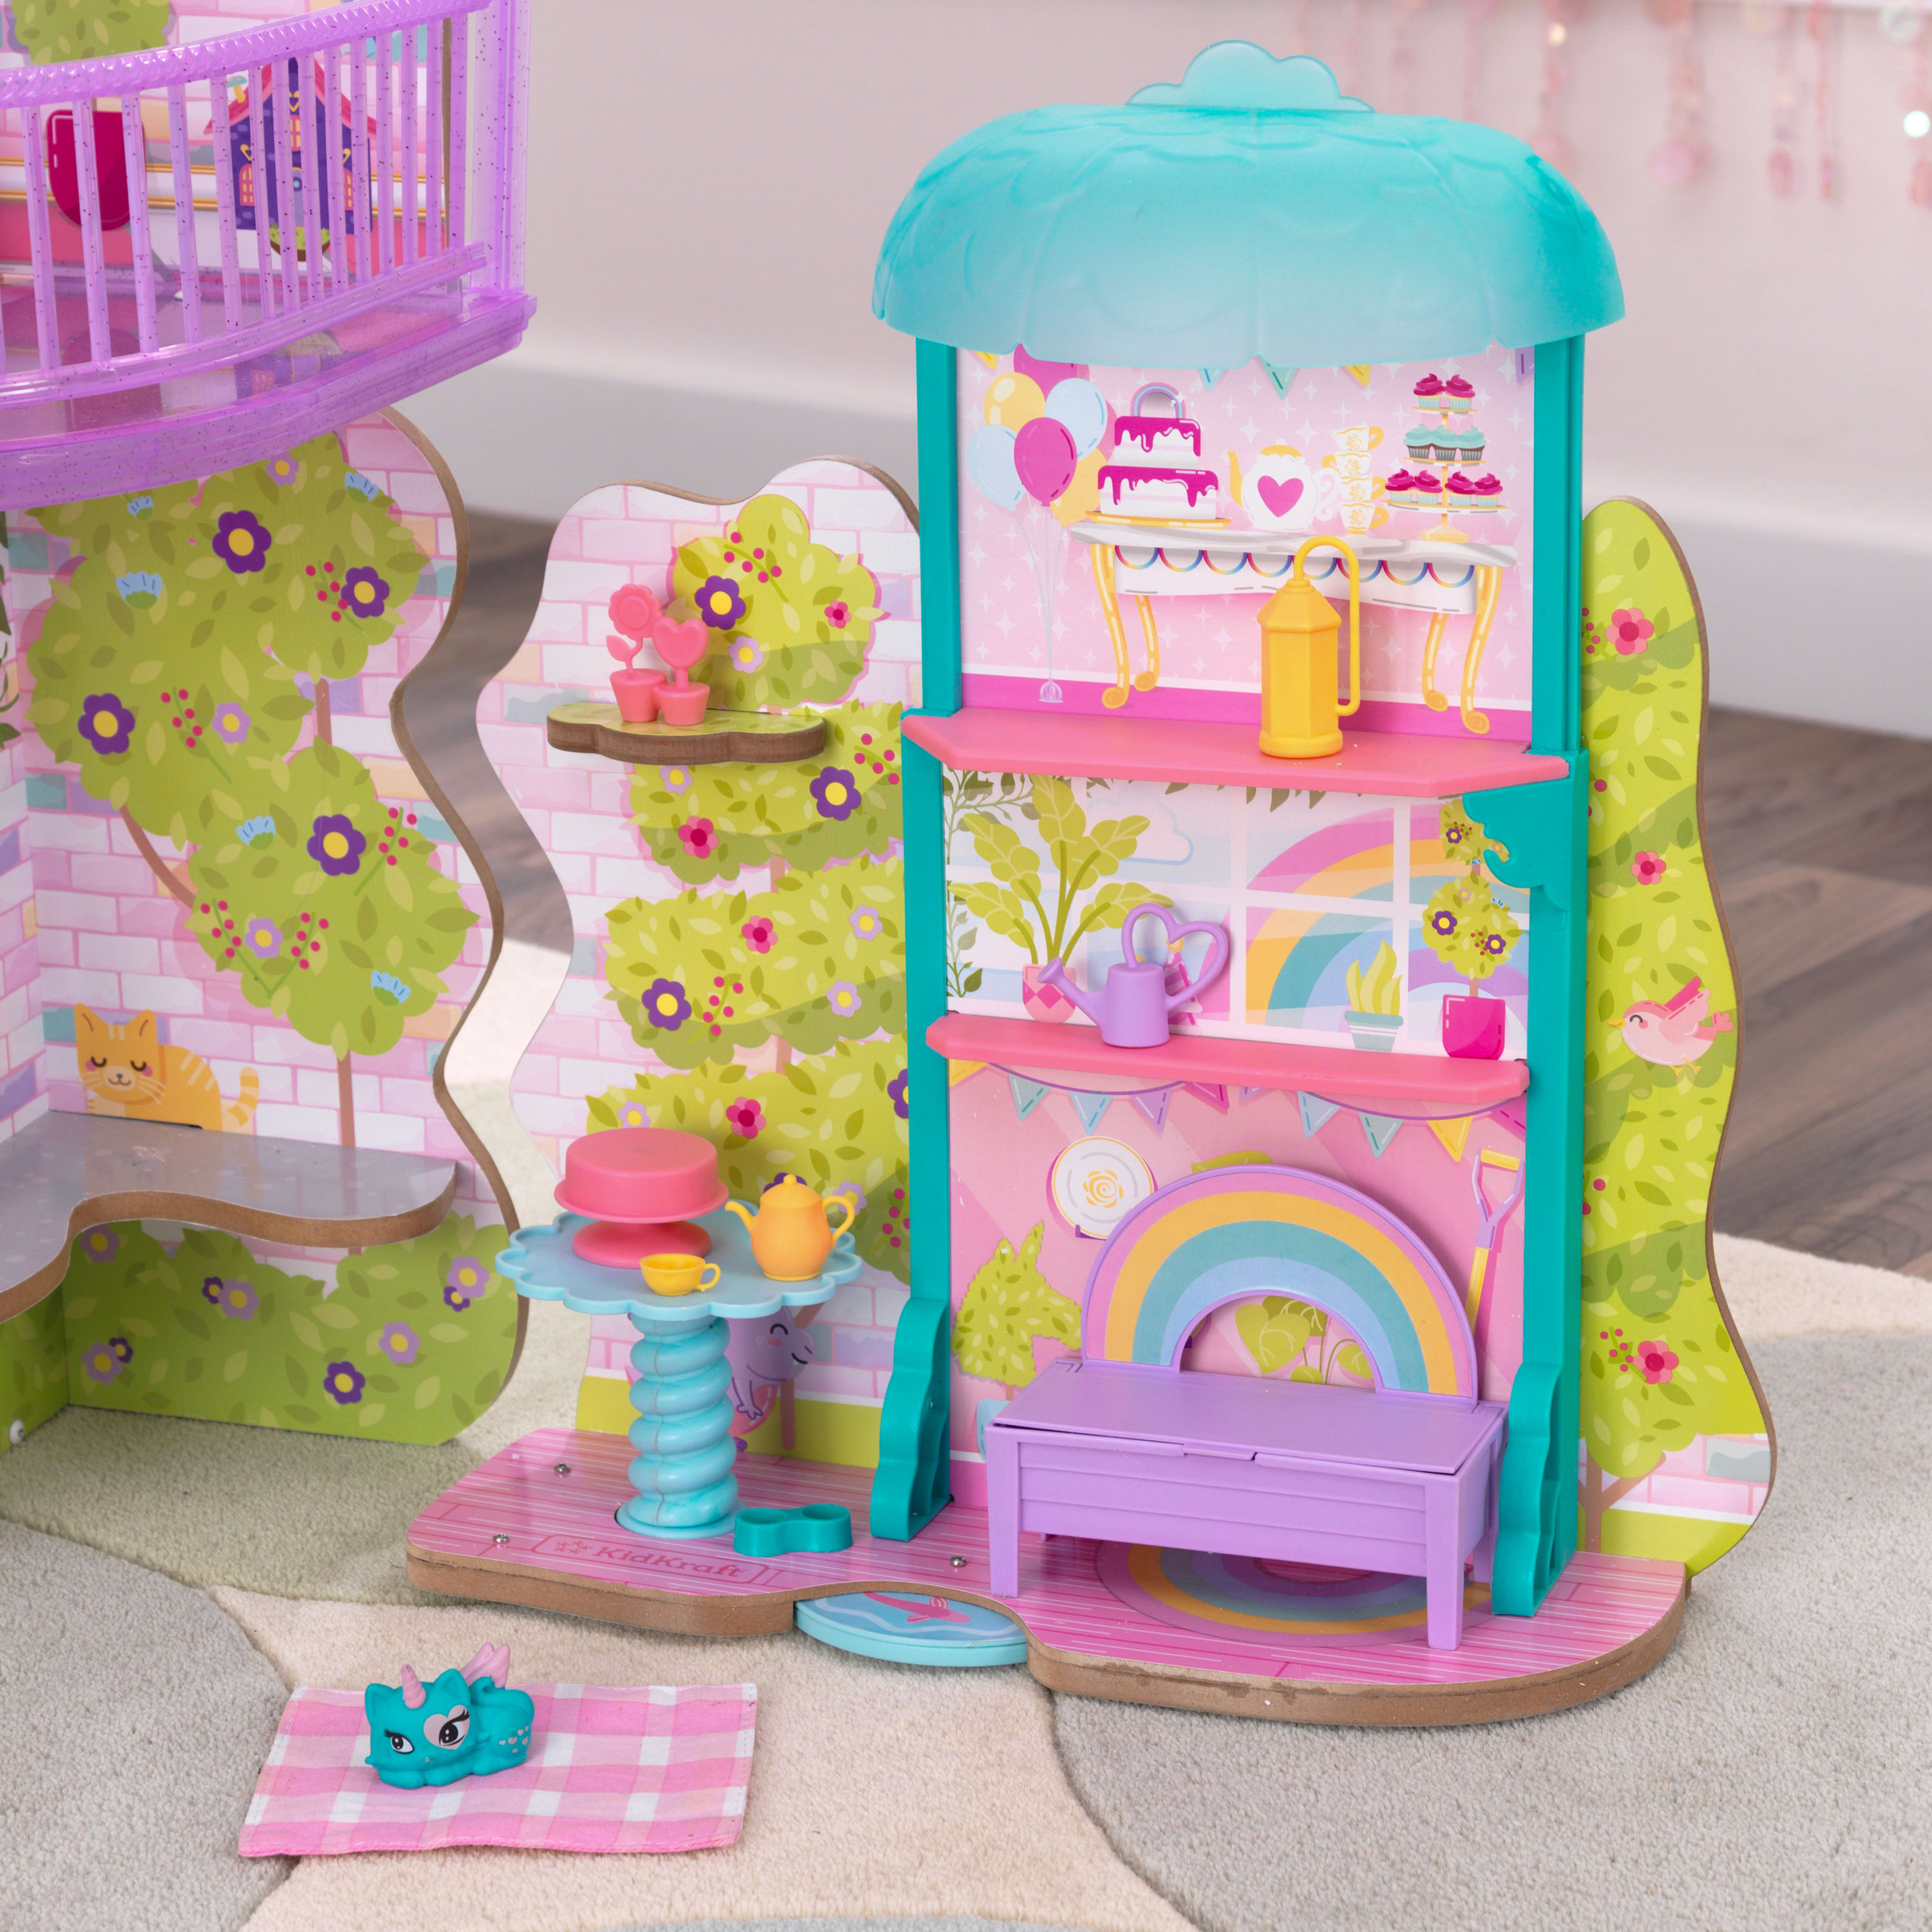 KidKraft Rainbow Dreamers Wooden Treetop Tea Time Gazebo Play Set with 10 Accessories - image 4 of 7